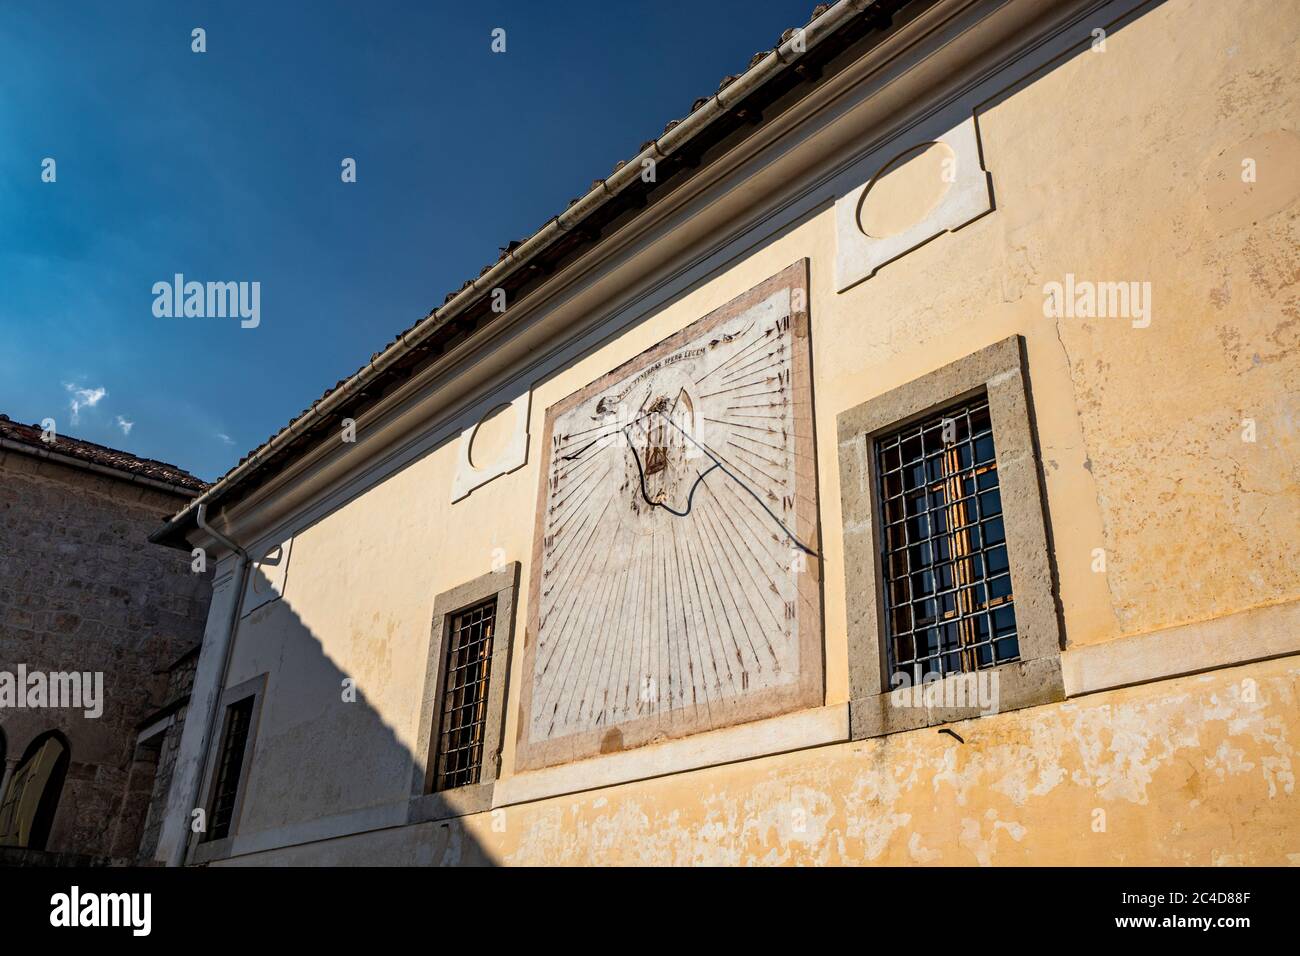 March 24, 2019 - Collepardo, Frosinone, Lazio, Italy - Trisulti Charterhouse, Carthusian monastery. The courtyard of the abbey with the ancient wall s Stock Photo